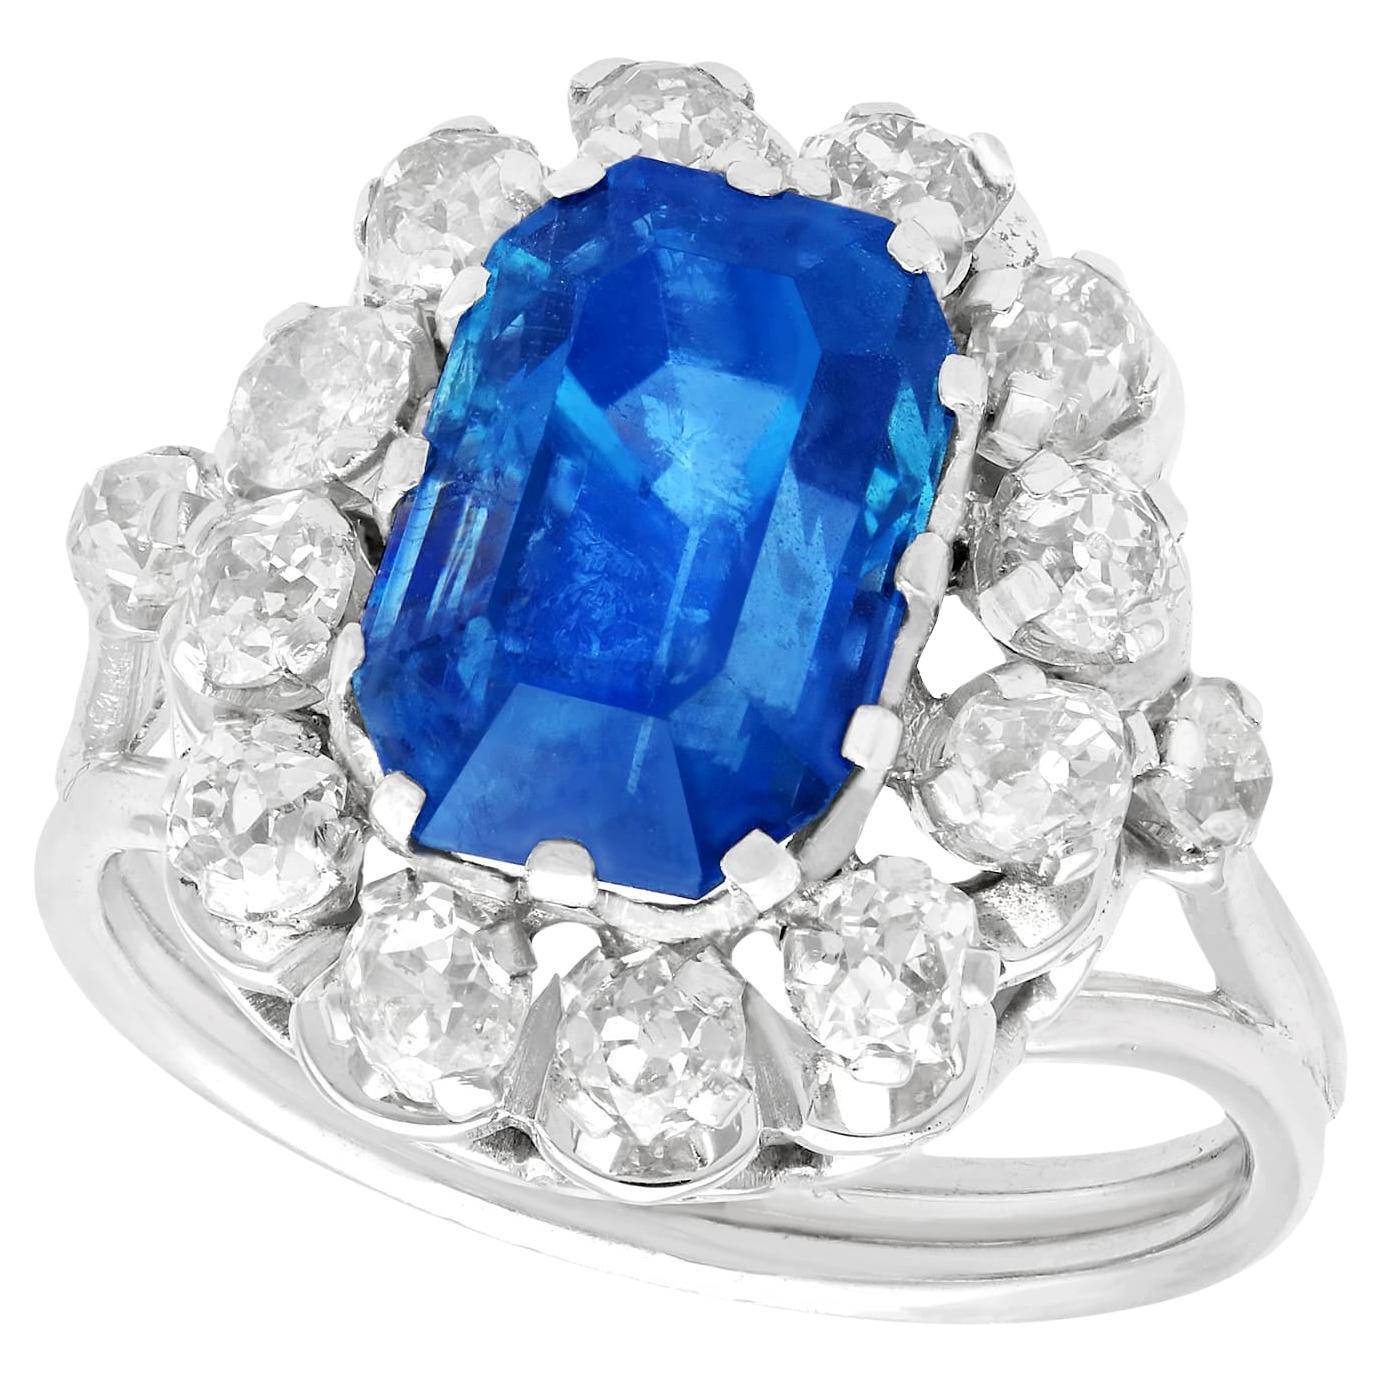 Vintage 1960s 6.53 Carat Sapphire and Diamond 18k White Gold Cocktail Ring For Sale